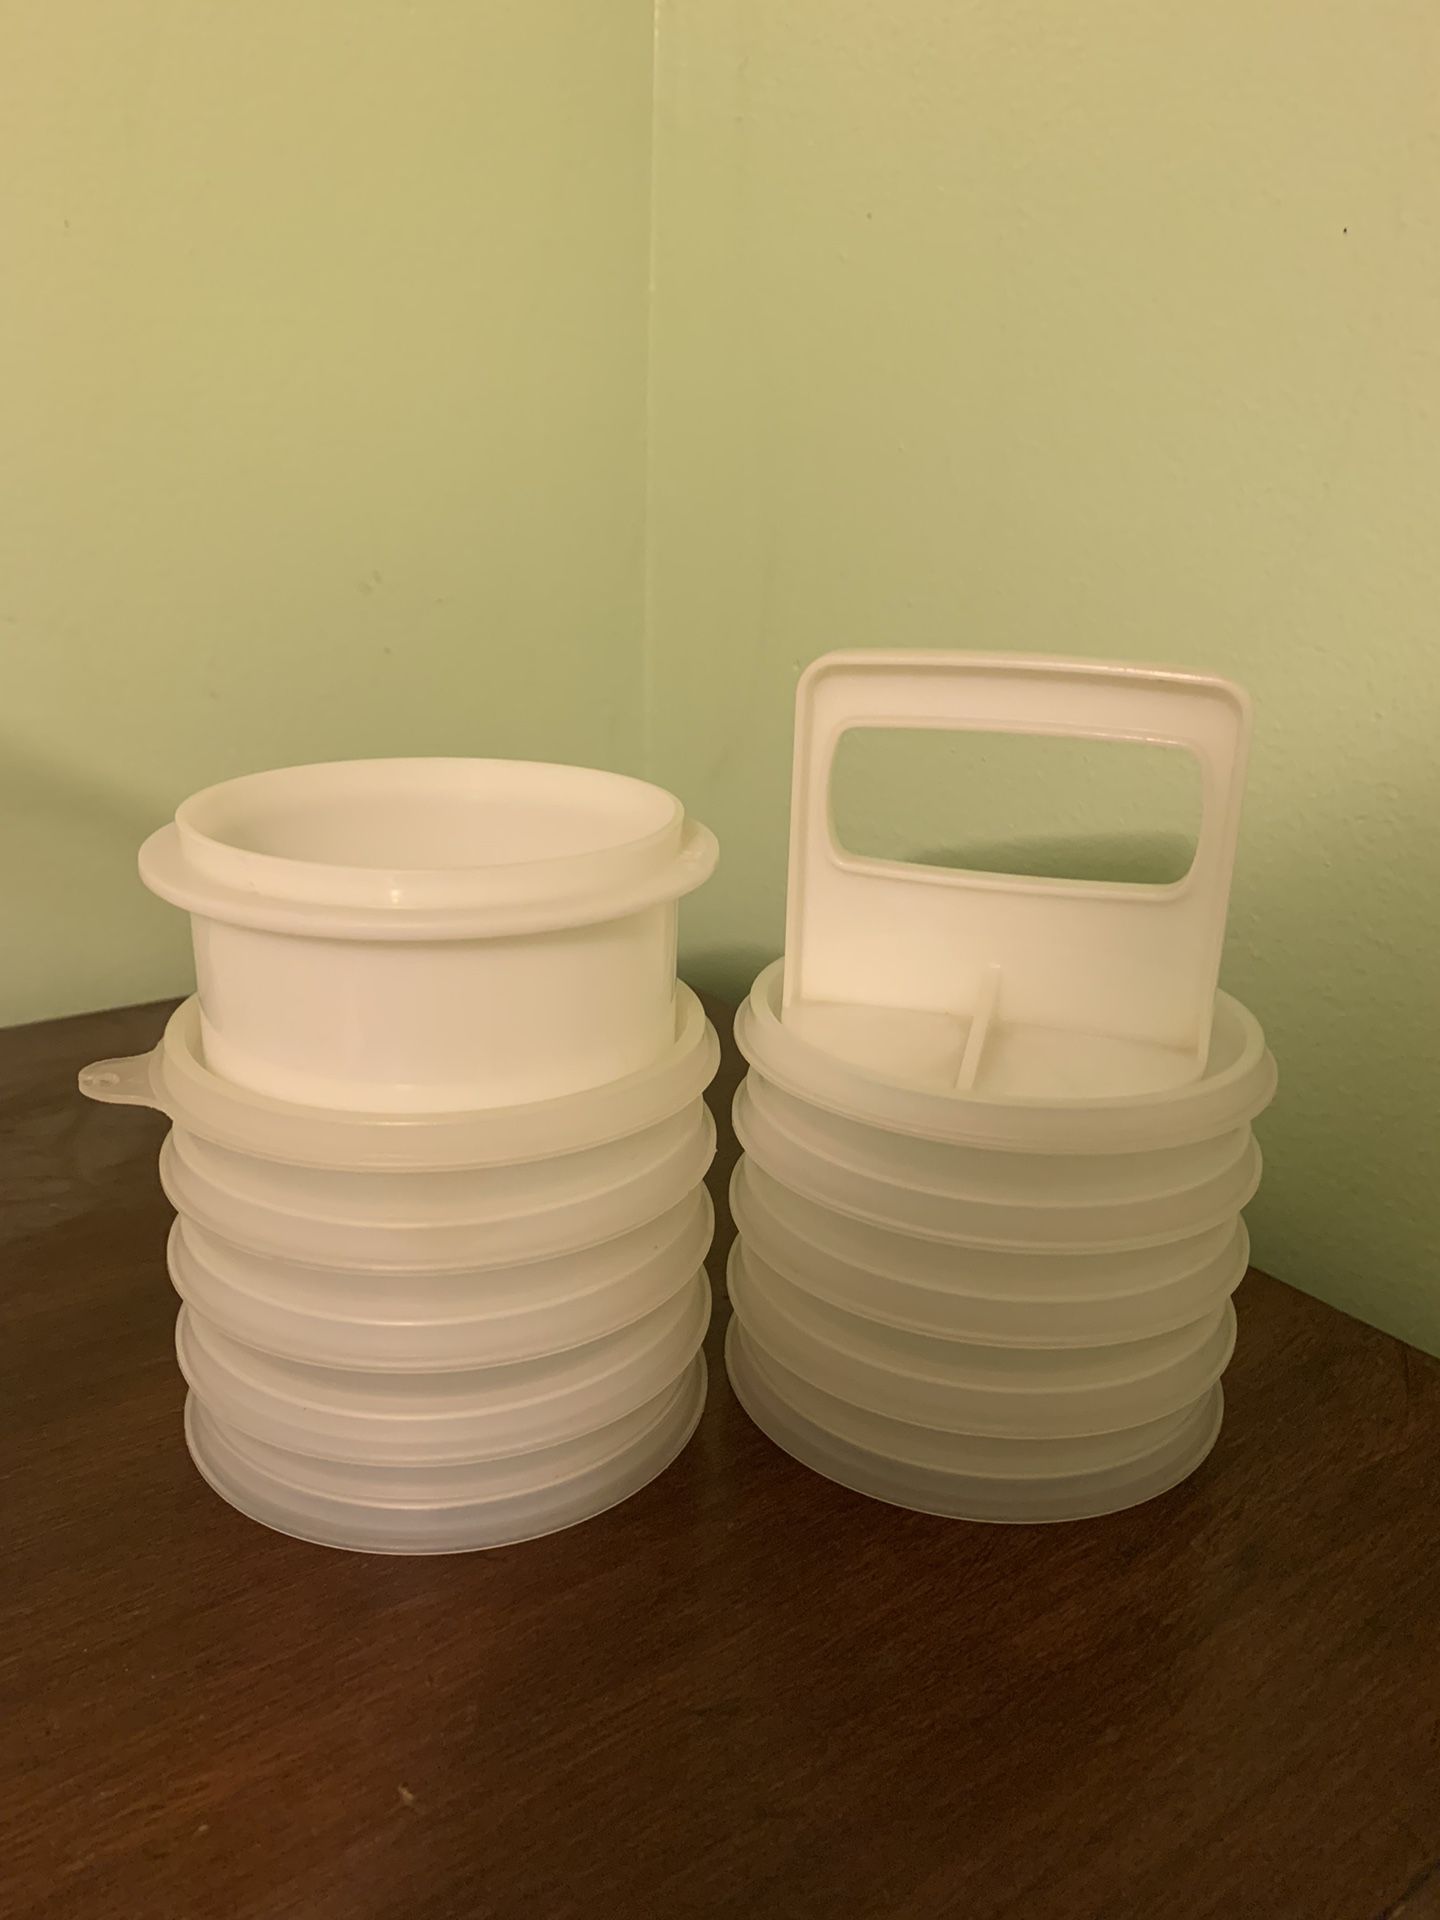 Vintage Tupperware Hamburger Press and 4 Storage Freezer Containers With Lid.  